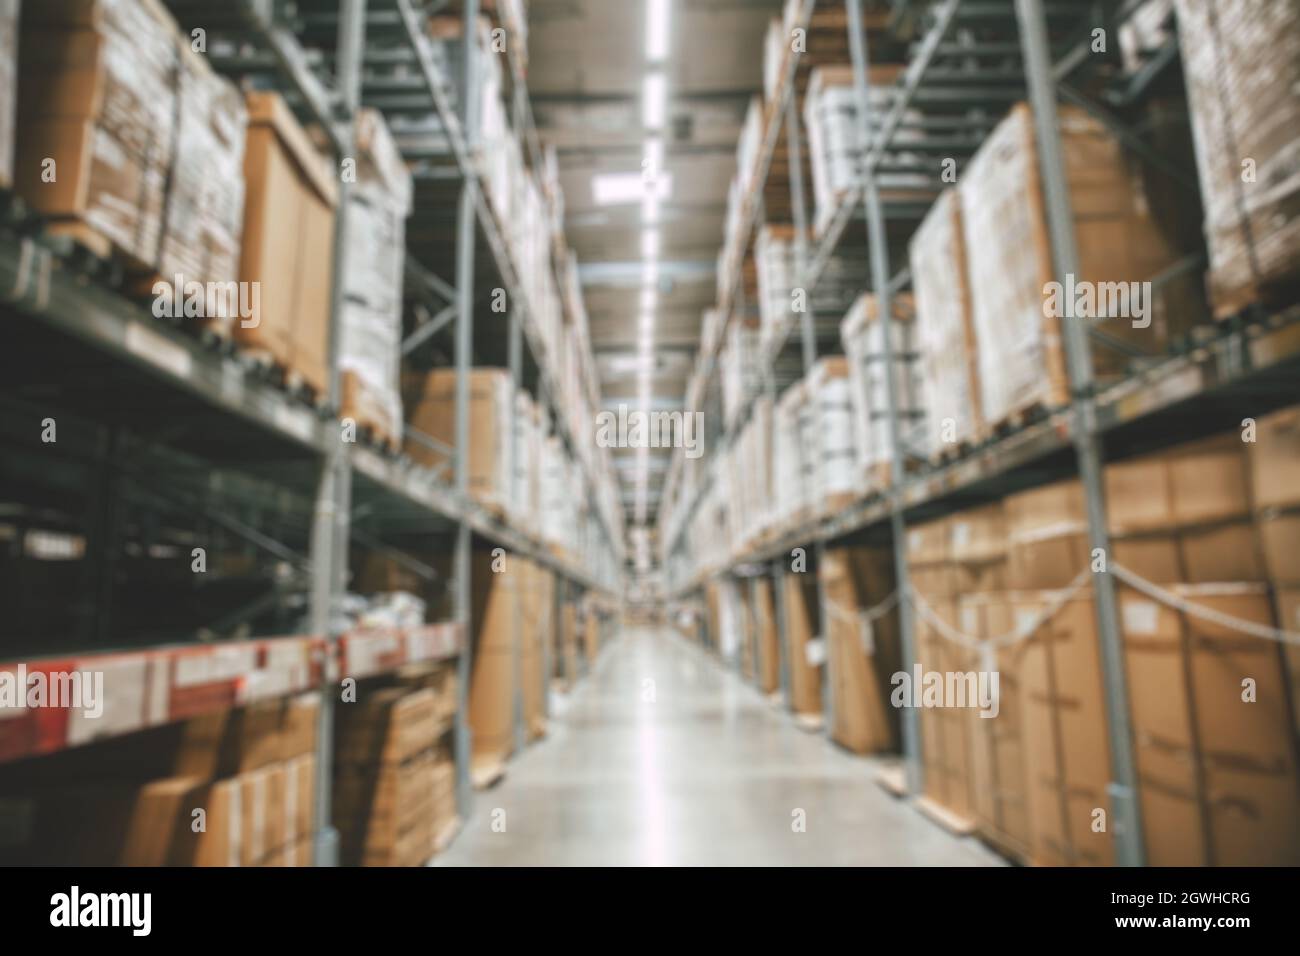 Blur warehouse goods stock products inventory or factory cargo storage prepare for shipping distribution background. Stock Photo